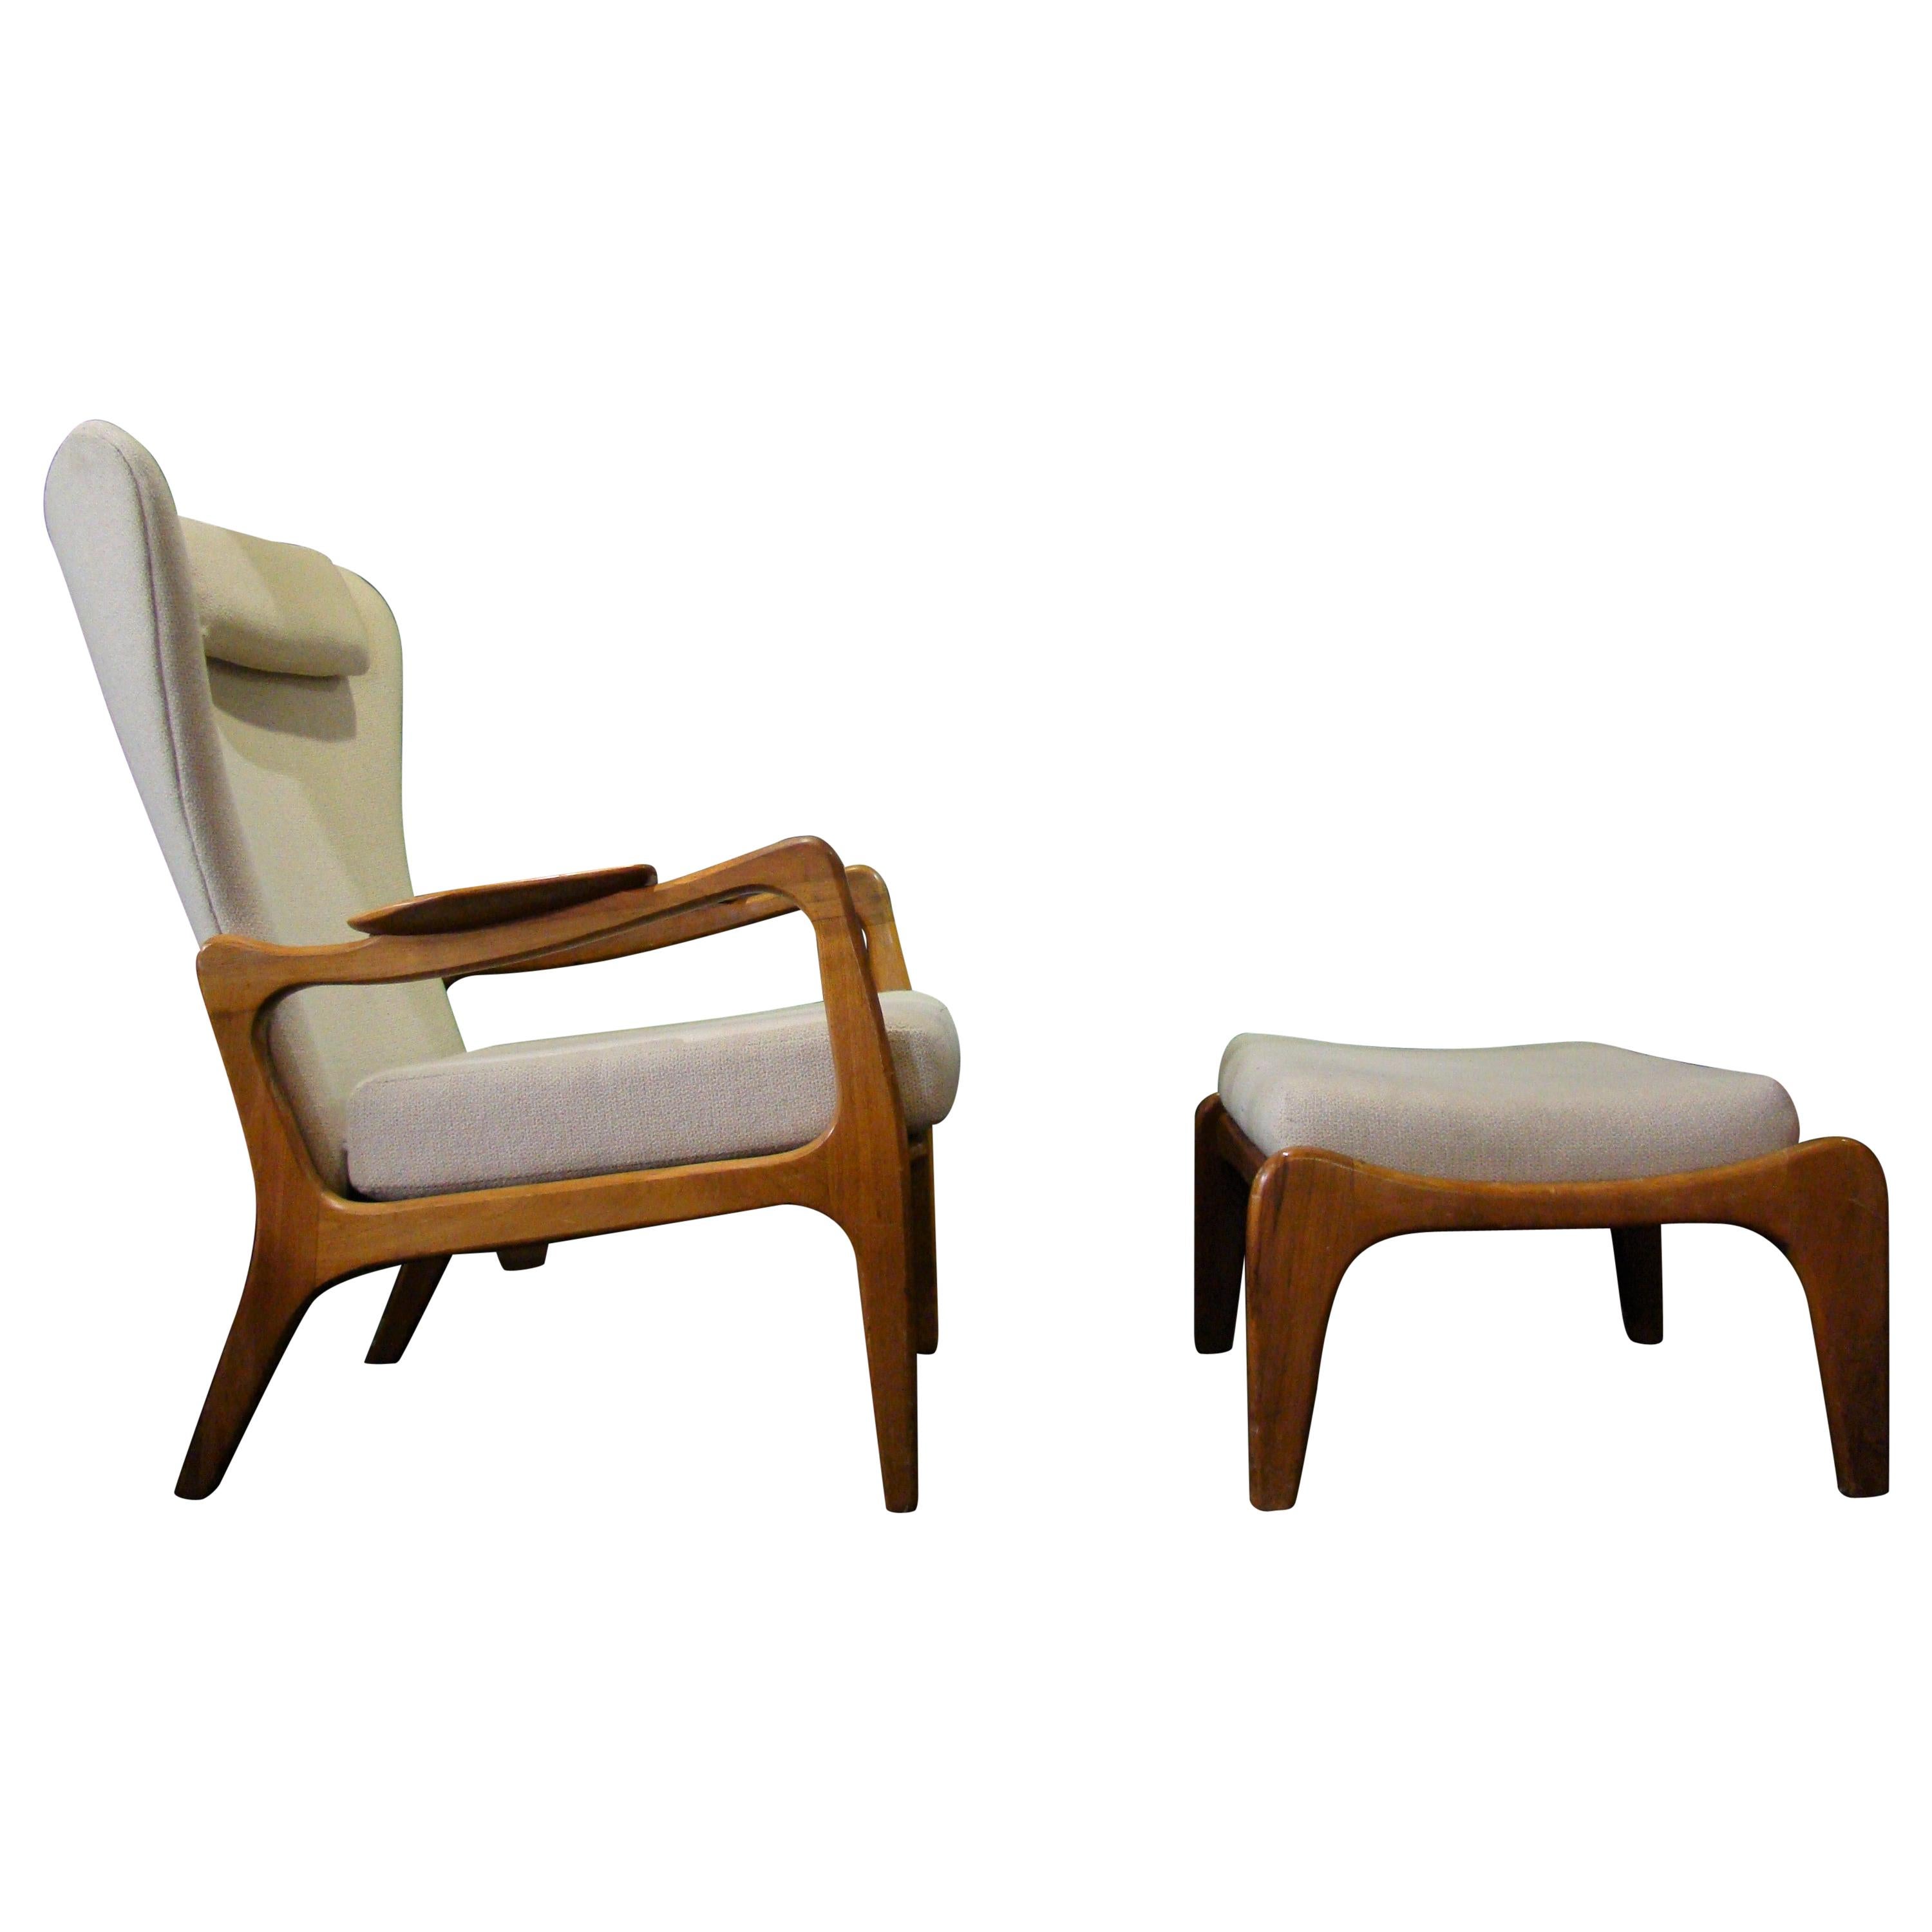 1950s Adrian Pearsall Wingback Lounge Chair and Ottoman for Craft & Associates